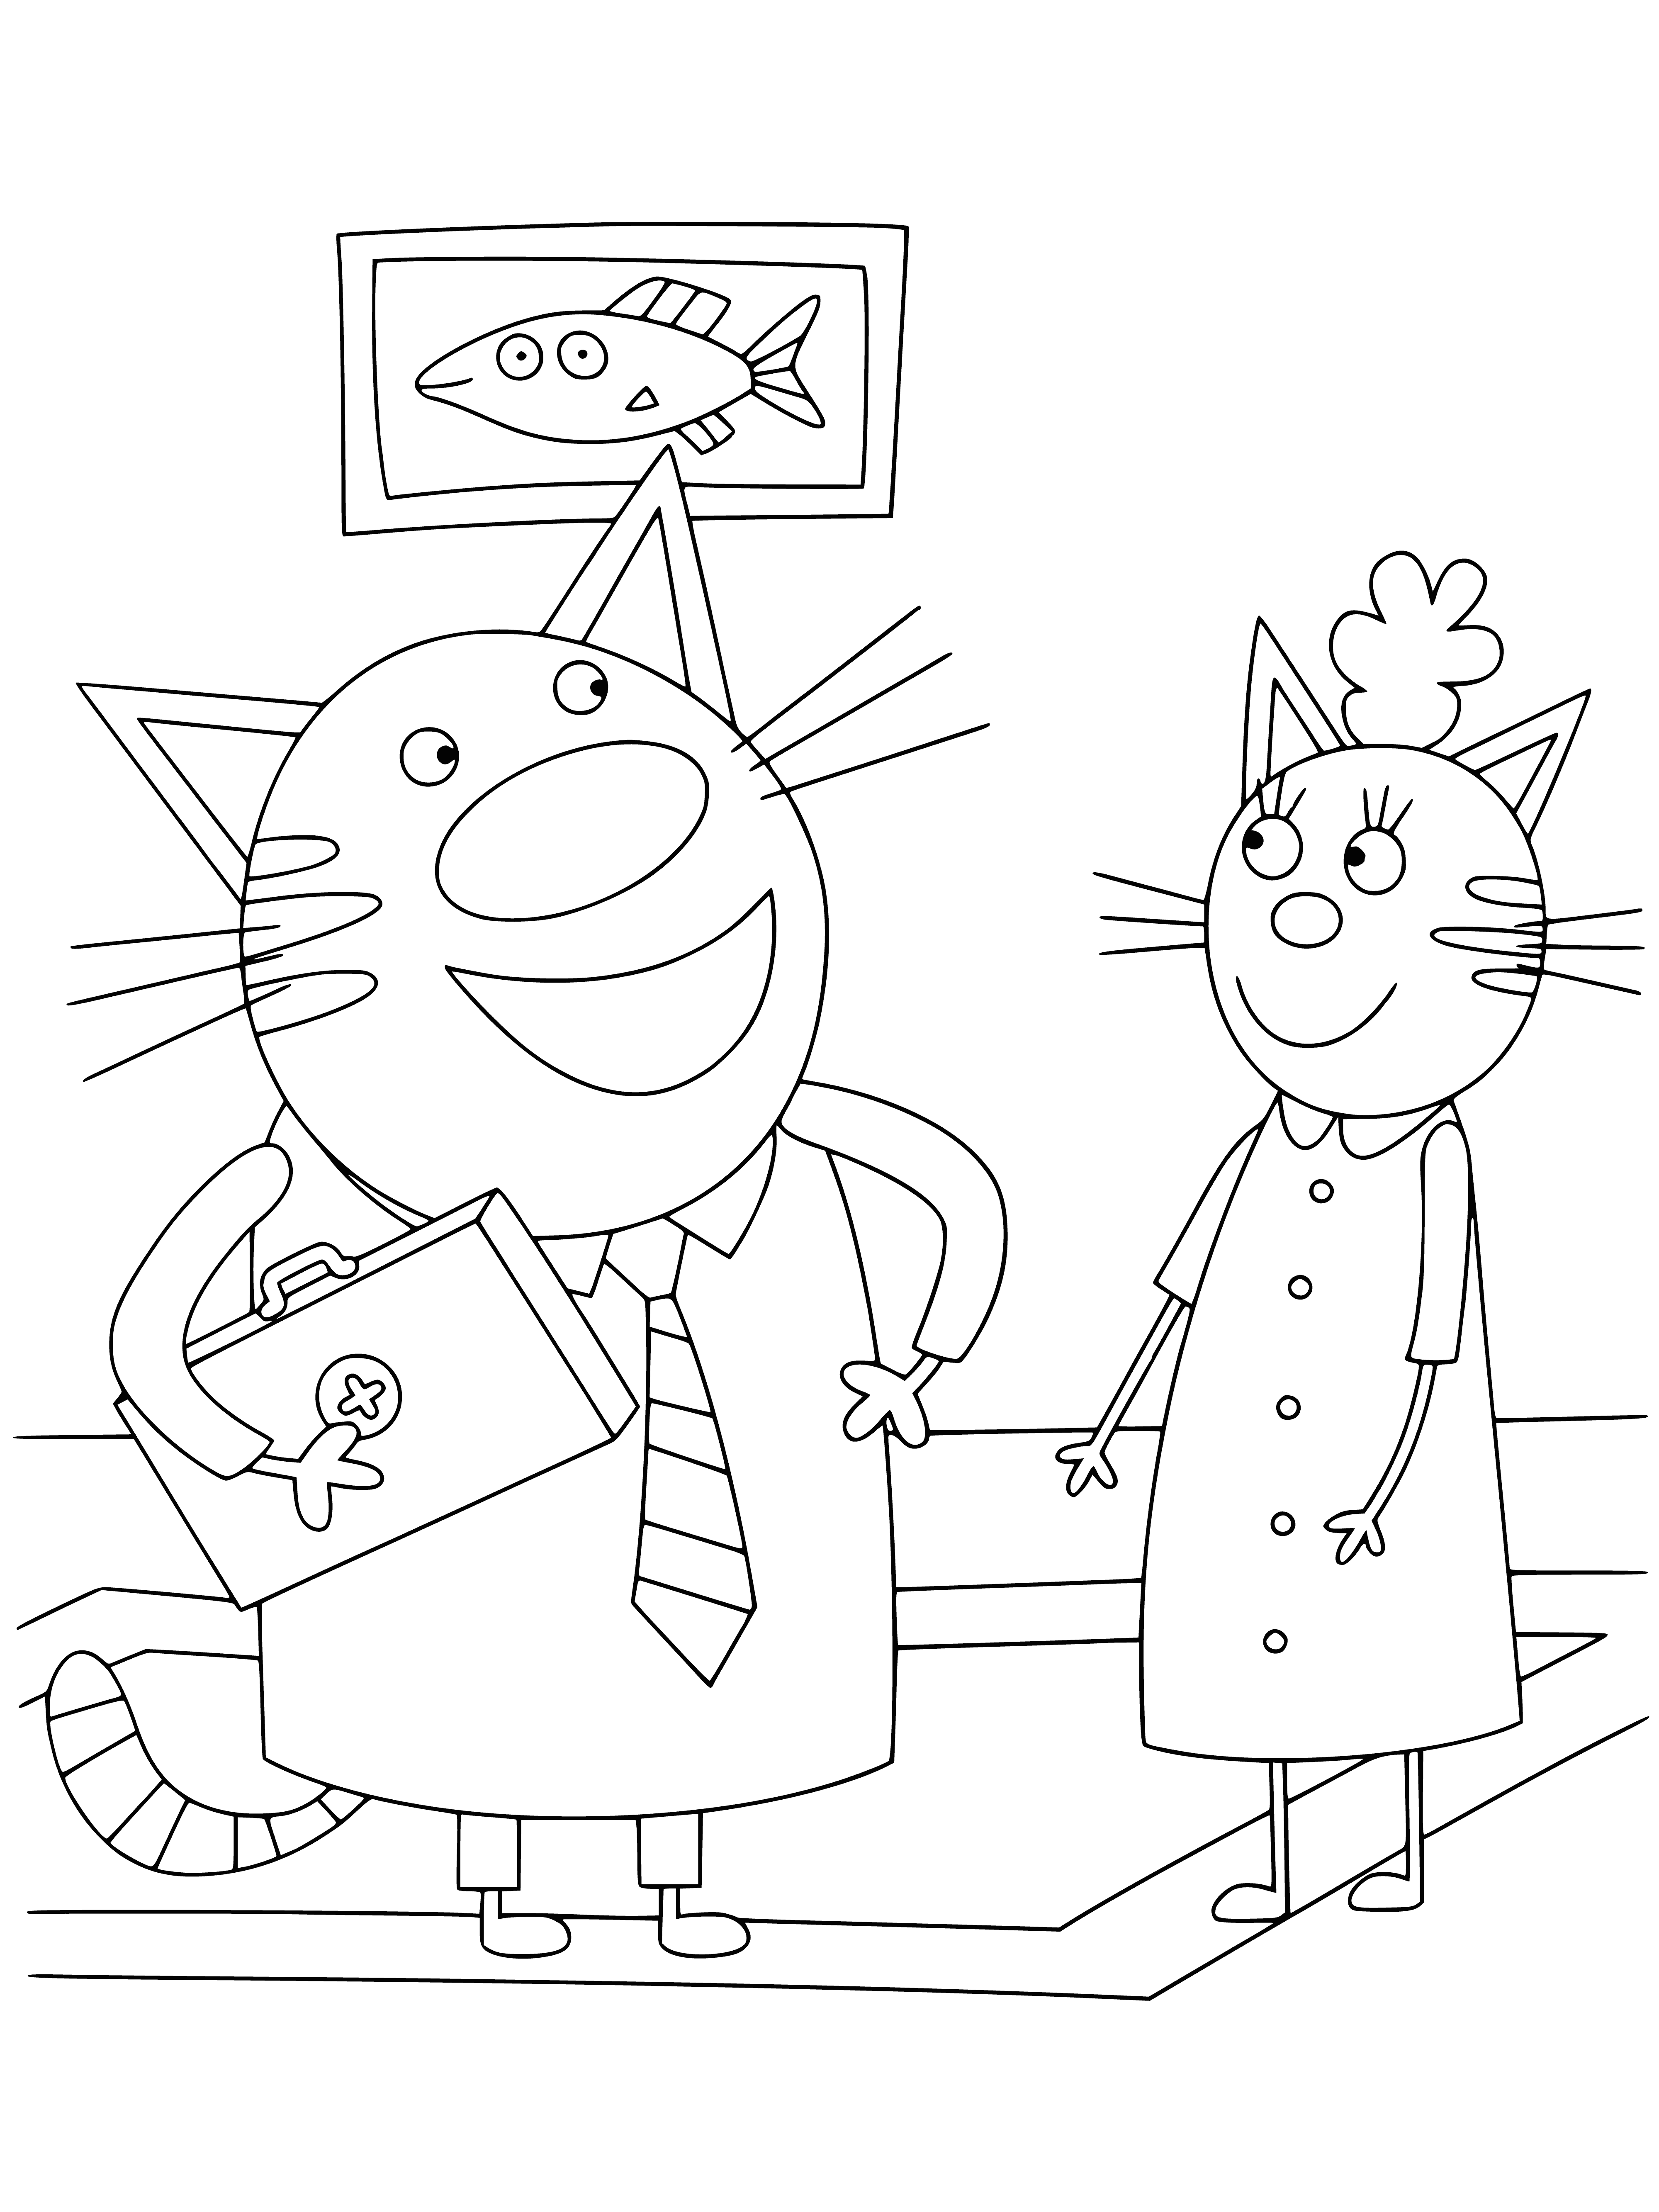 coloring page: 3 cats playing on a playset; 1 on swings, 1 on slide, 1 on climbing frame.